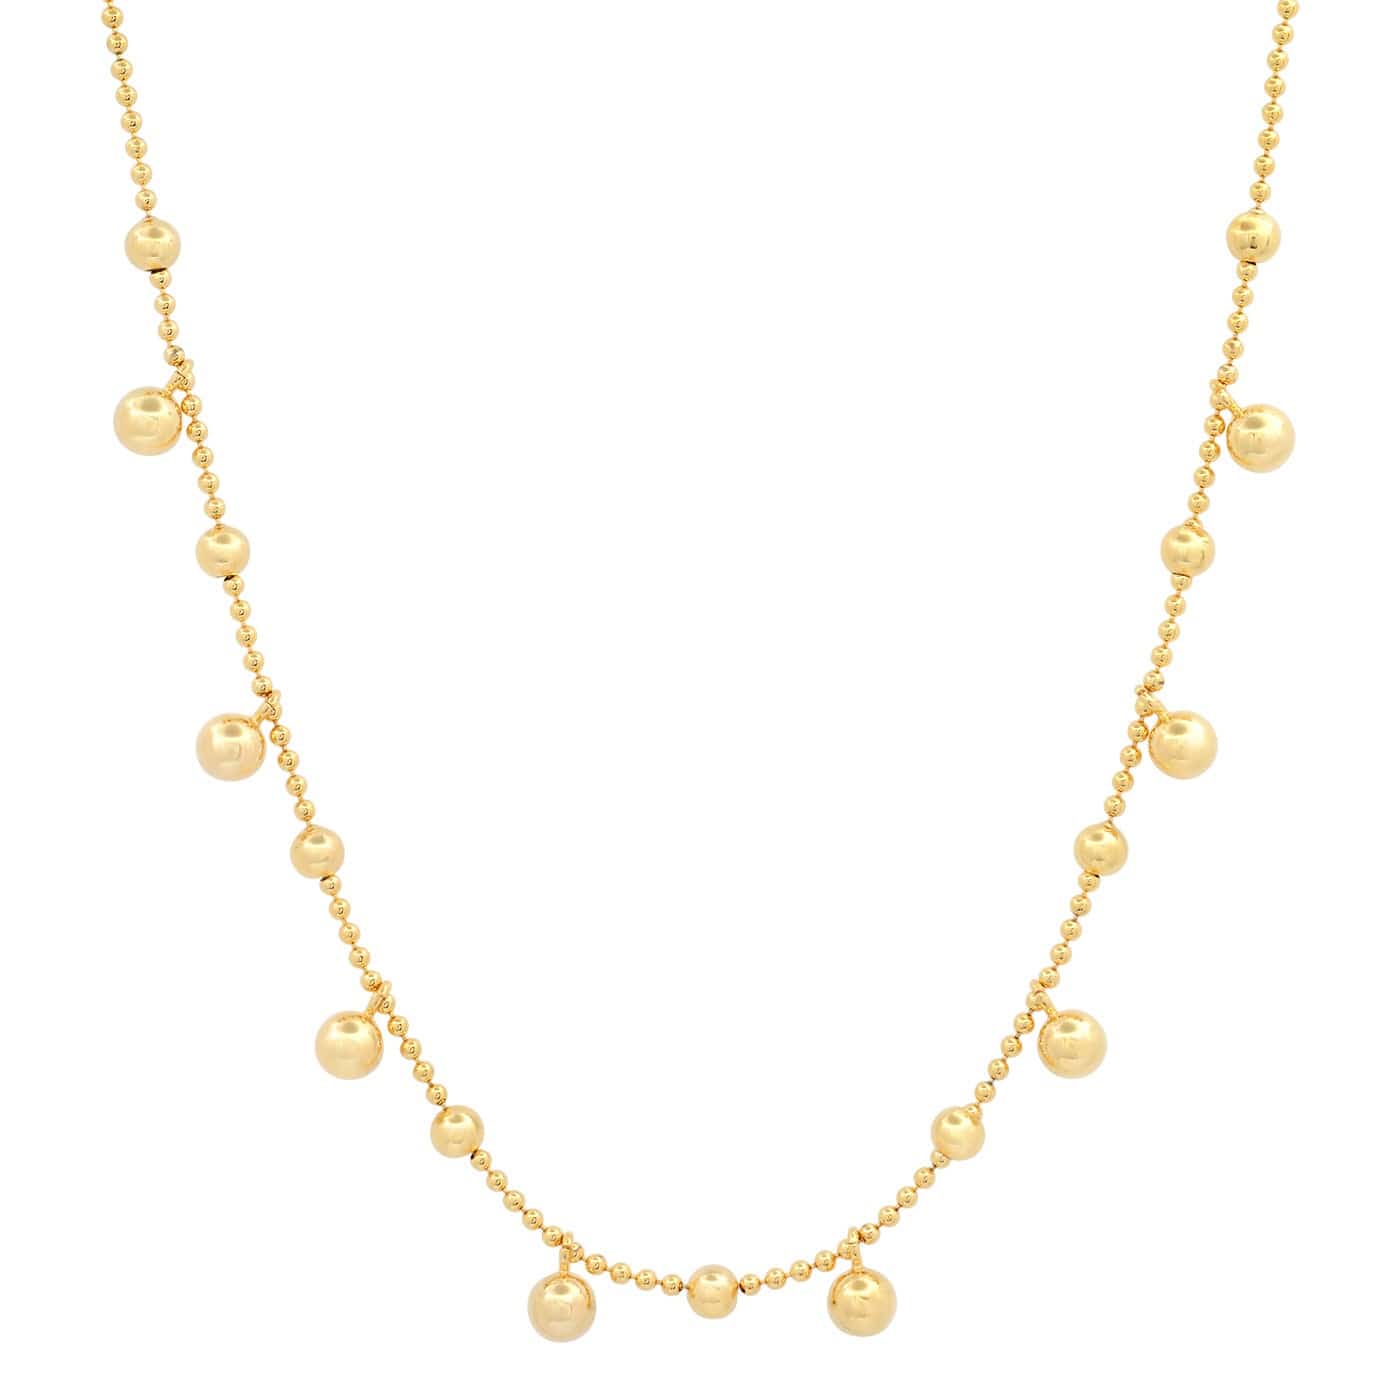 TAI JEWELRY Necklace Ball Chain with Gold Ball Charms